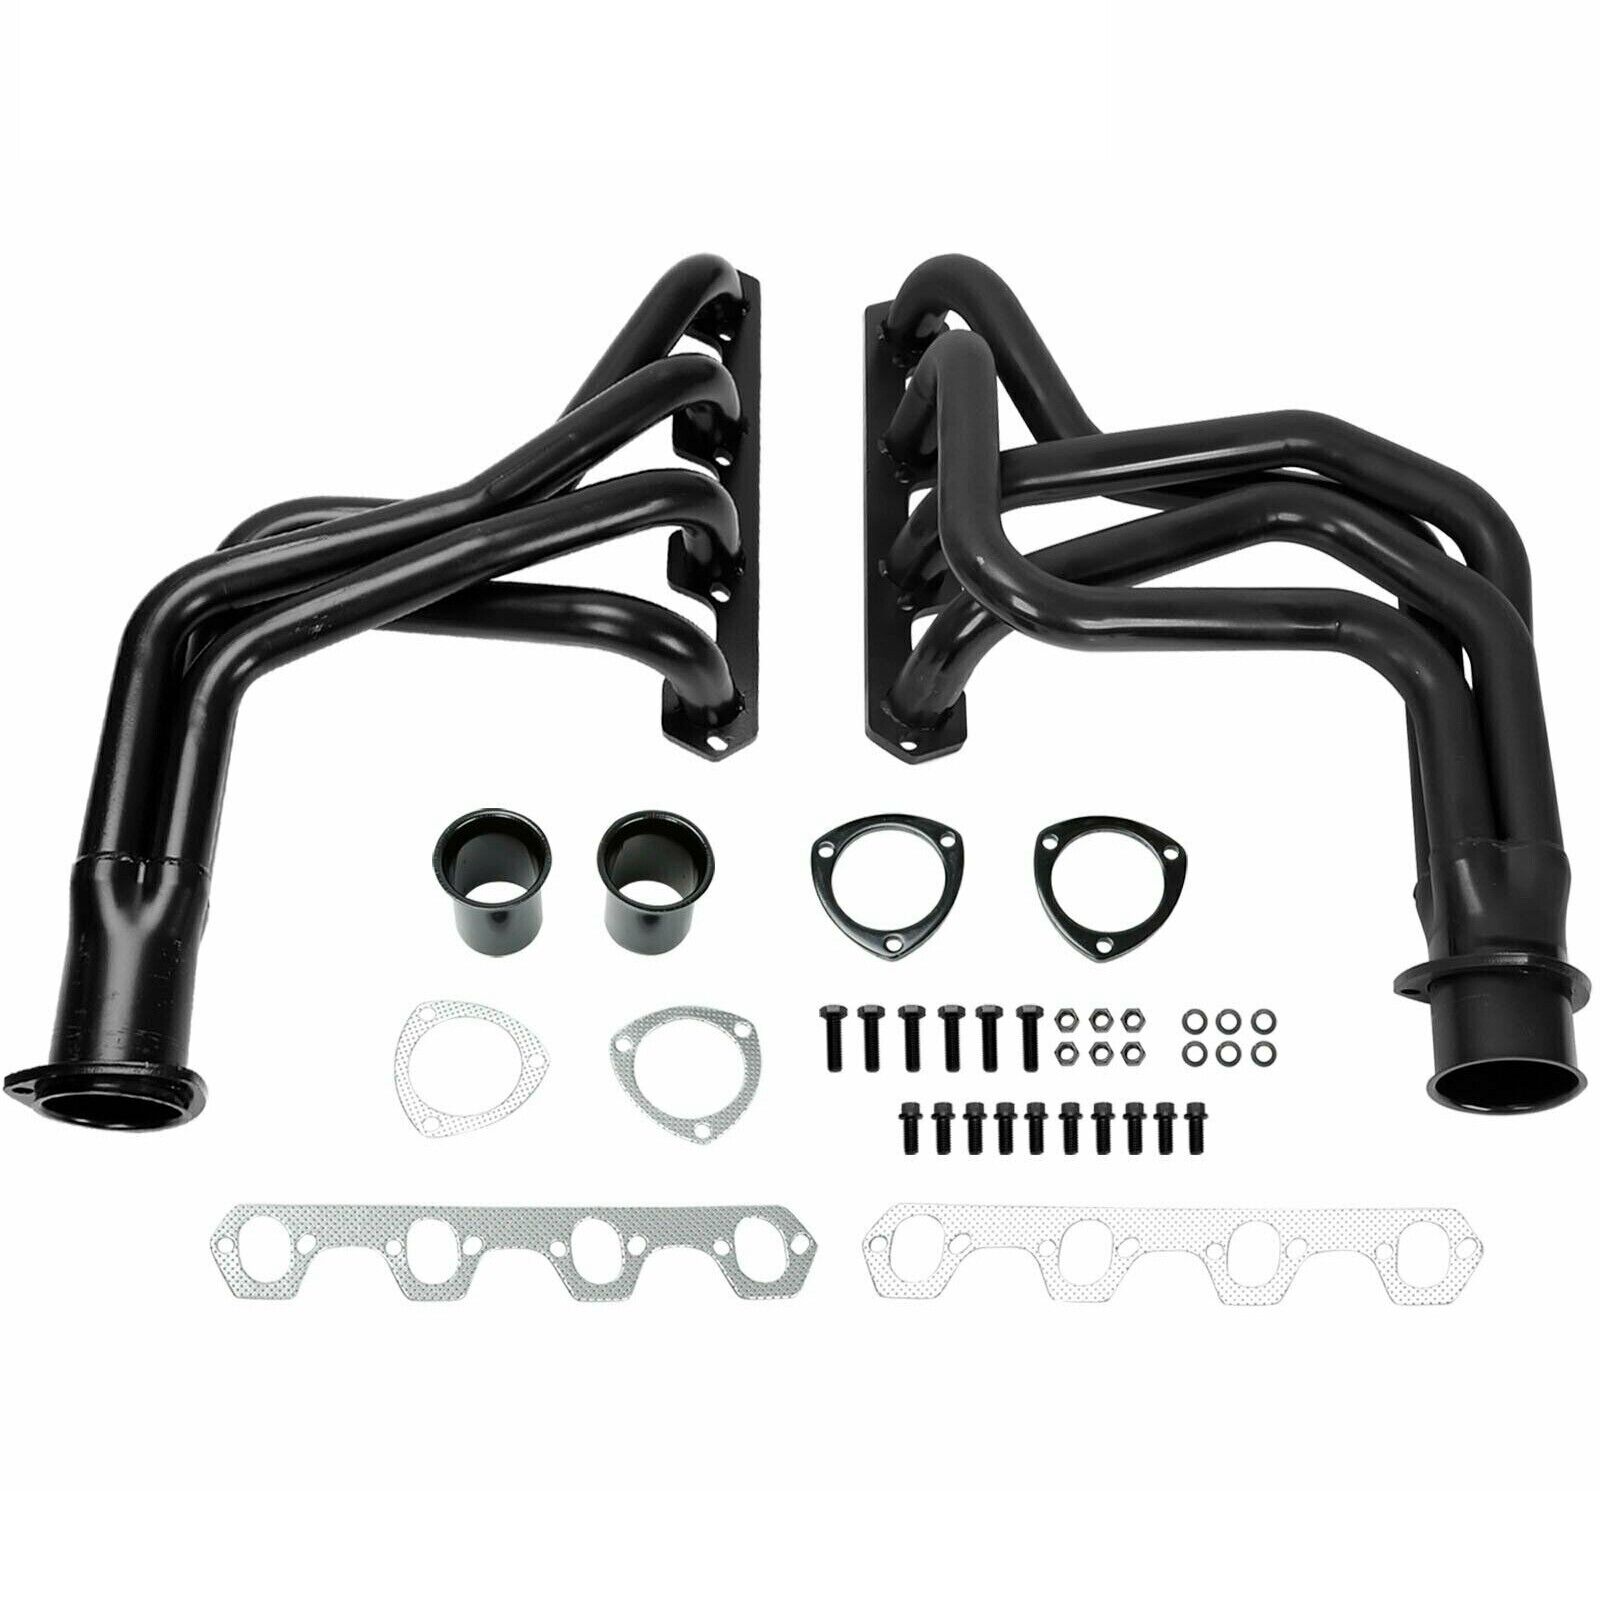 For Ford F-100 F100 5.0L V8 302W Pickup Truck 2W  69-79 Exhaust Headers Manifold